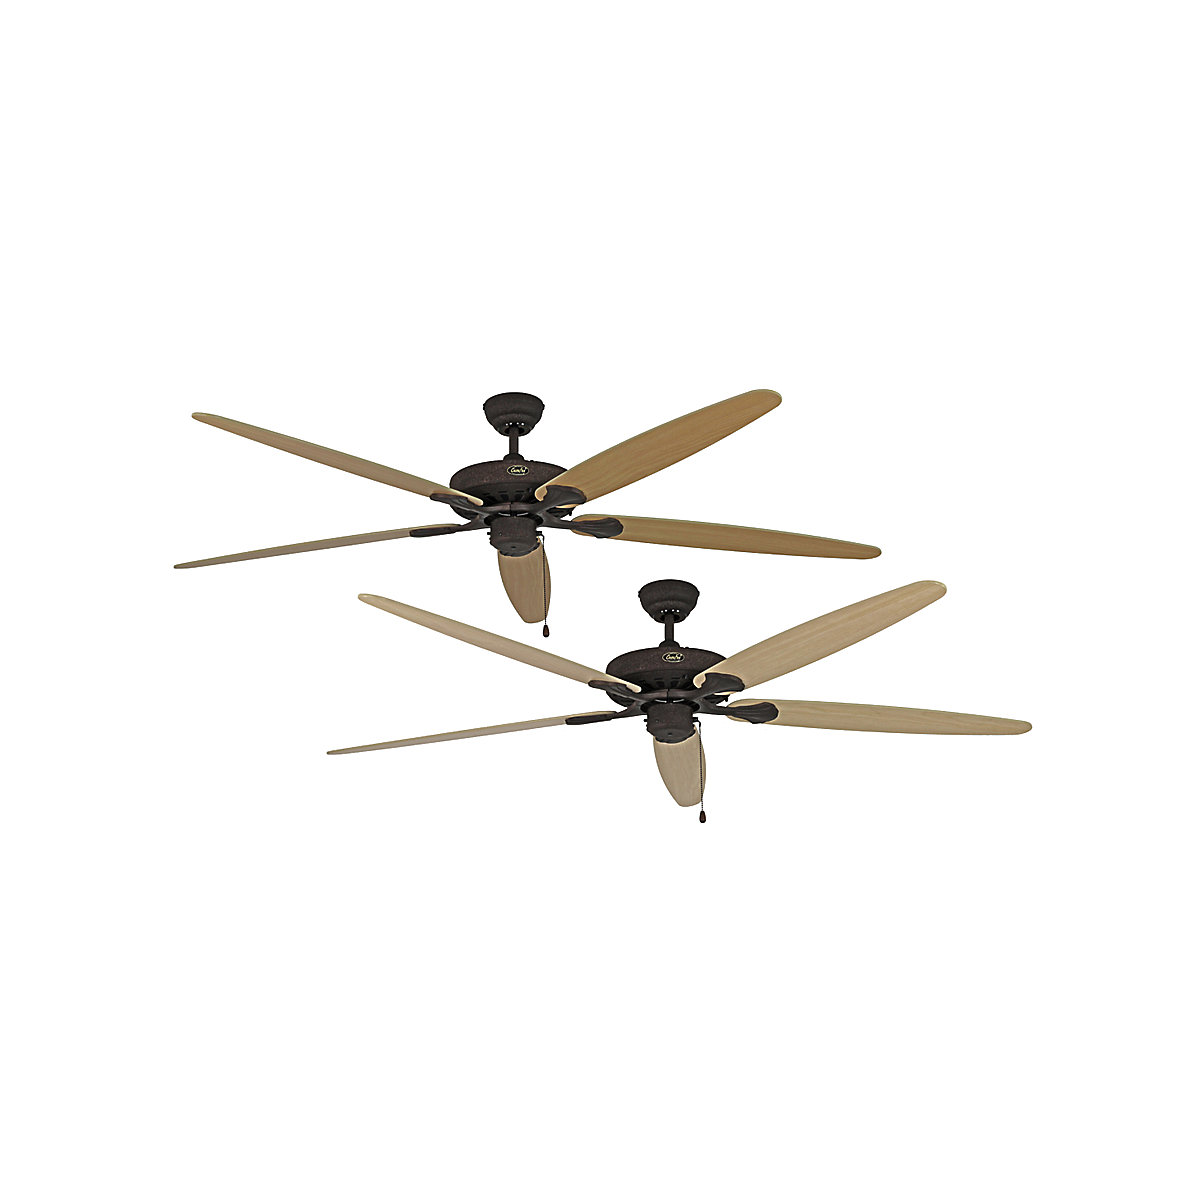 CLASSIC ROYAL ceiling fan, rotor blade Ø 1800 mm, maple / beech / antique brown / bronze-2